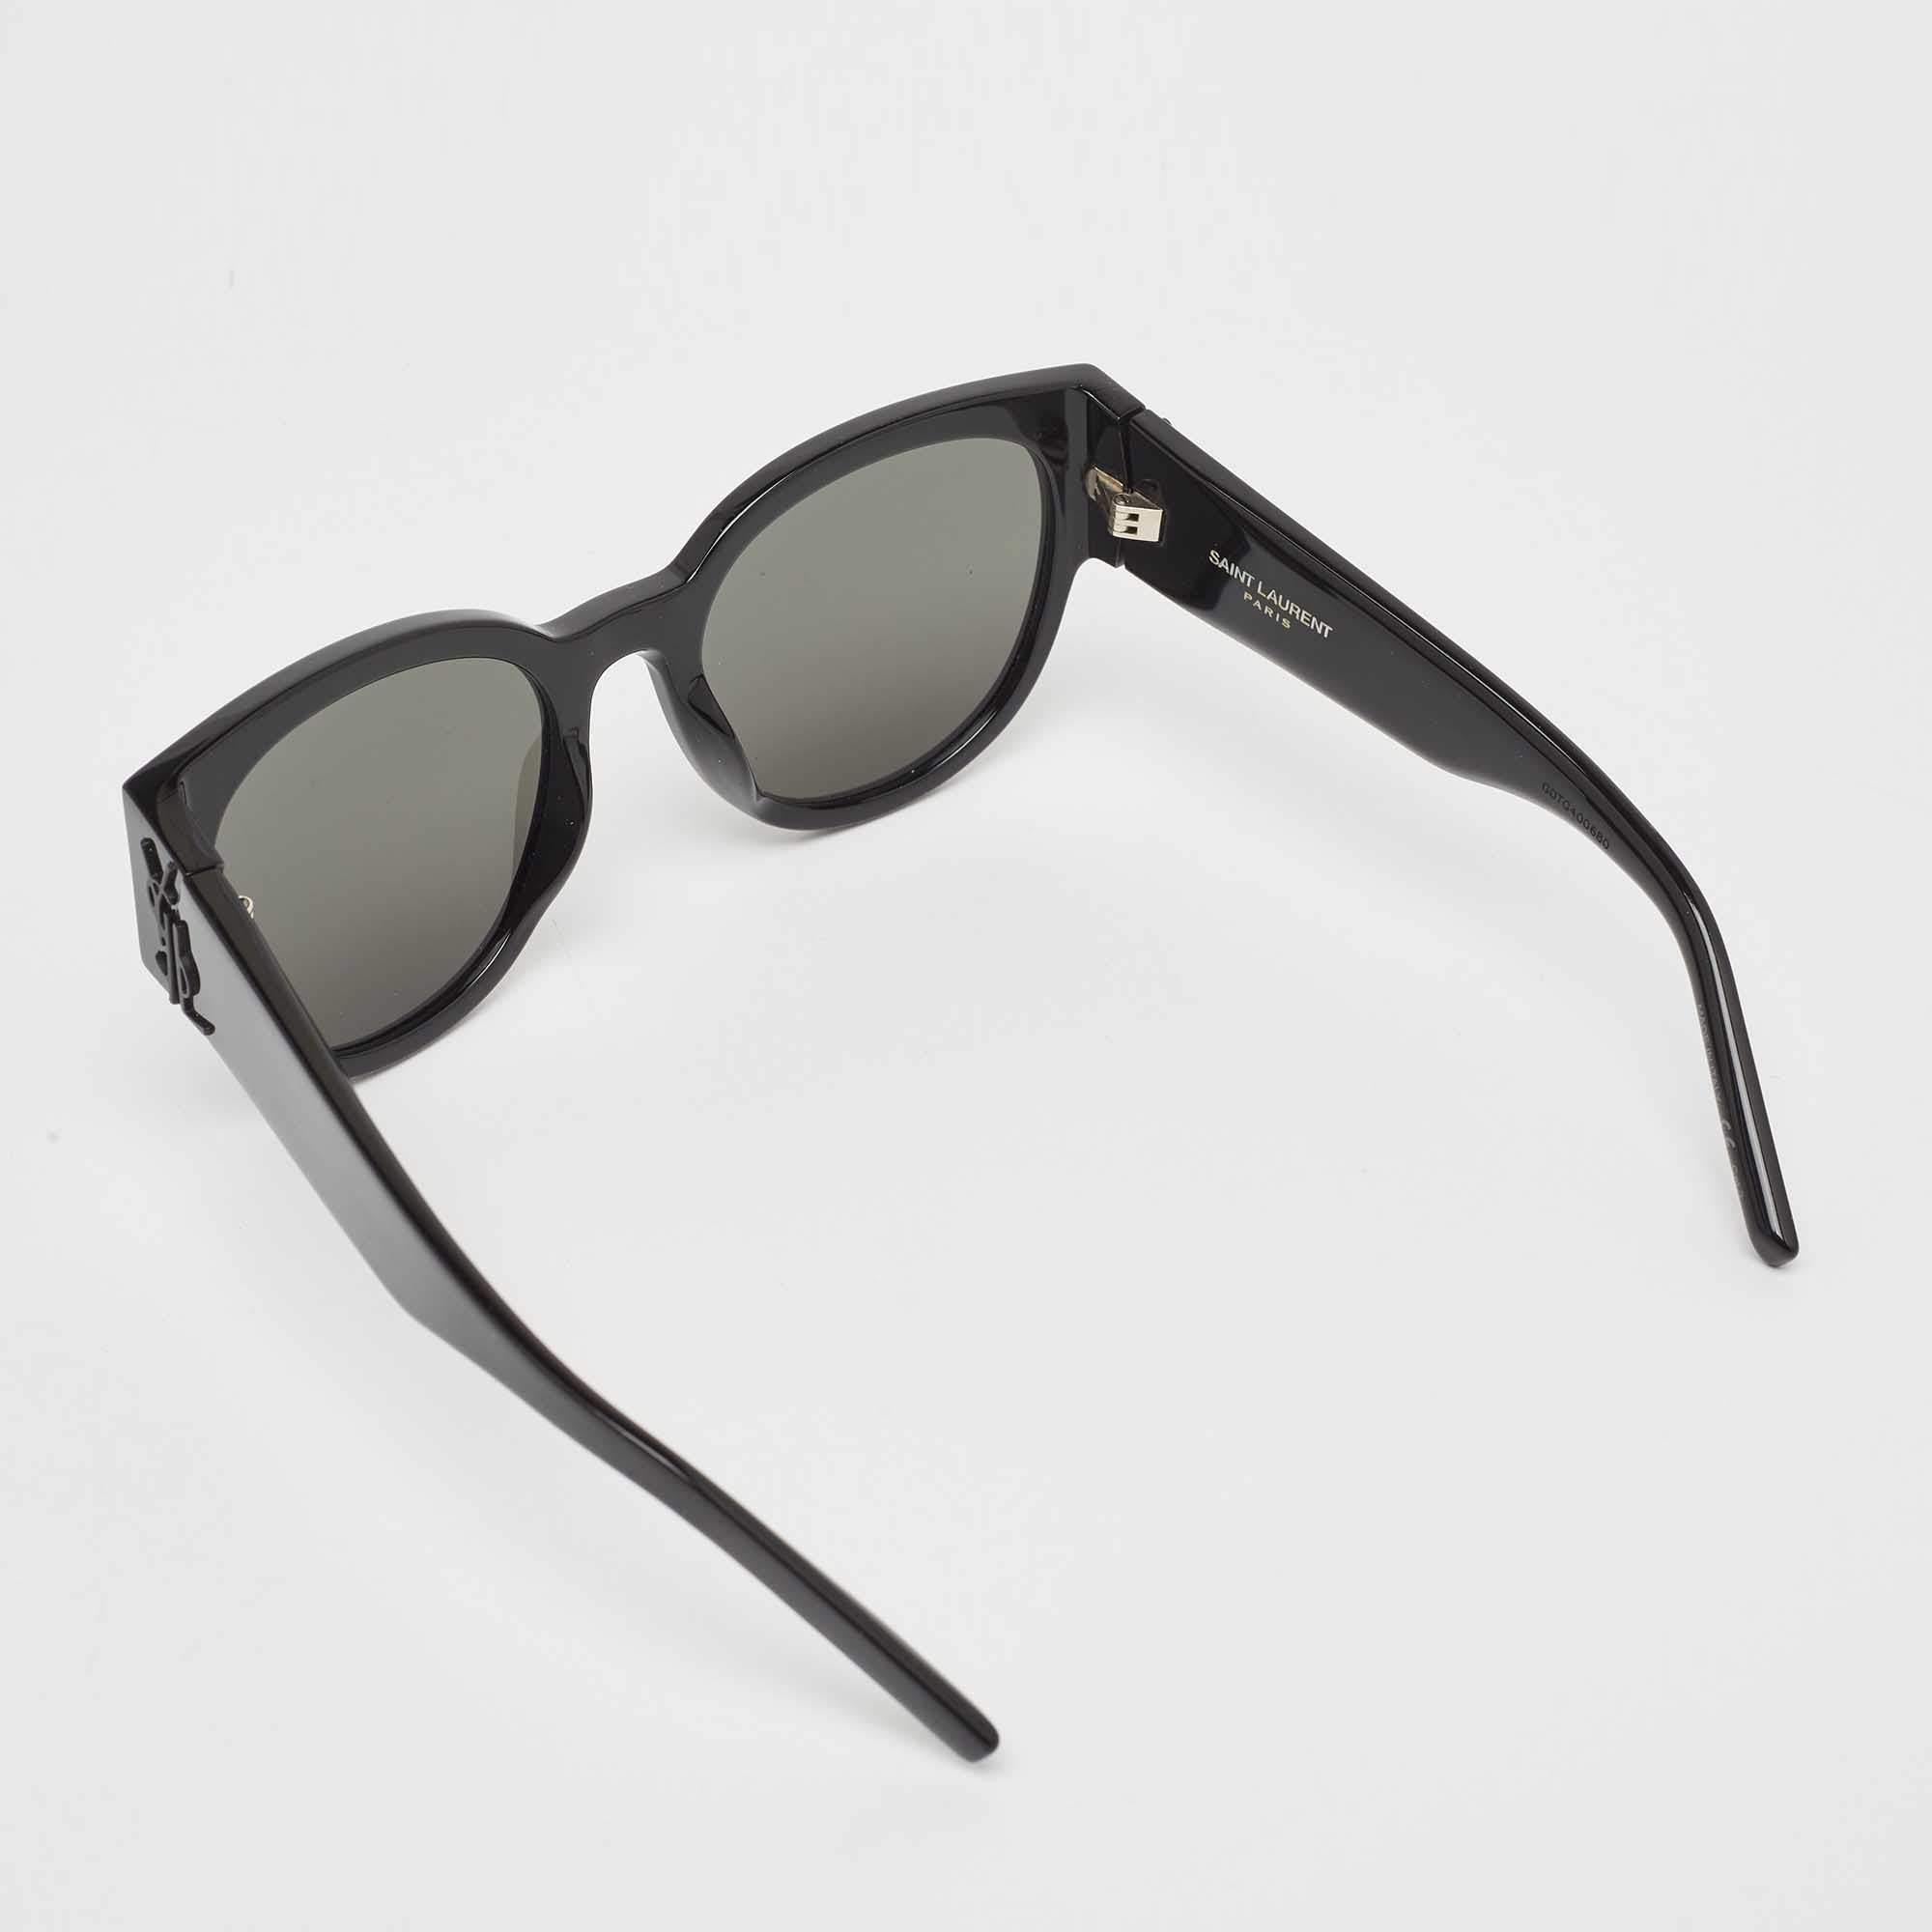 Embrace sunny days in full style with the help of this pair of Saint Laurent sunglasses. Created with expertise, the luxe sunglasses feature a well-designed frame and high-grade lenses that are equipped to protect your eyes.

Includes
Info Booklet,